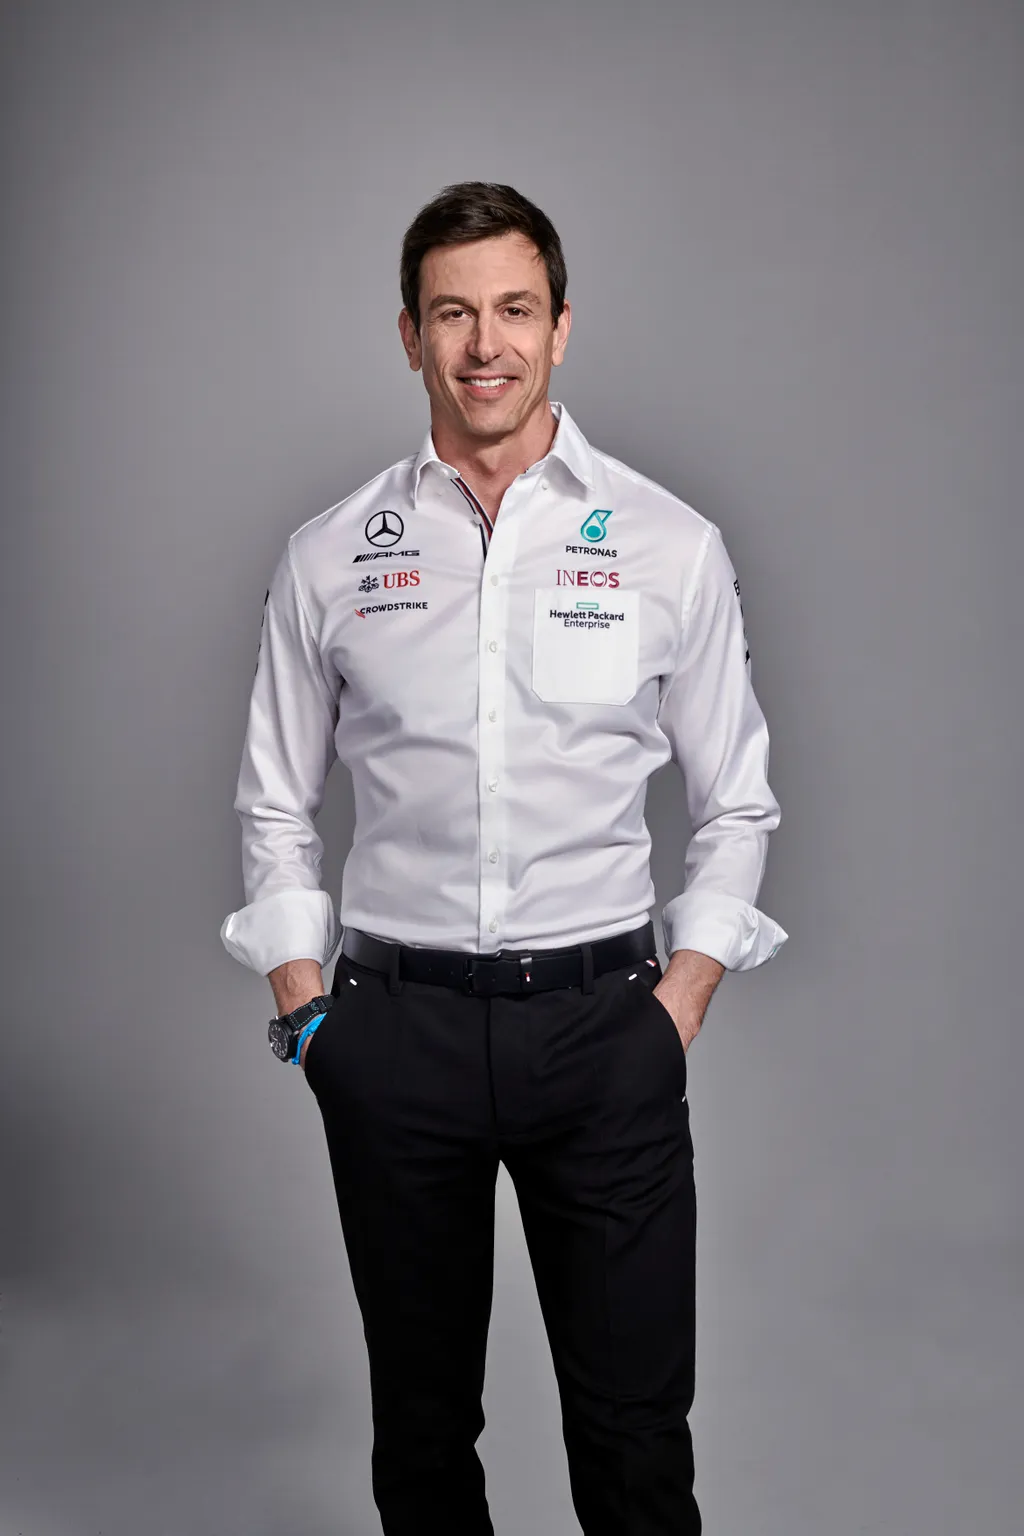 Forma-1, Mercedes, Toto Wolff 